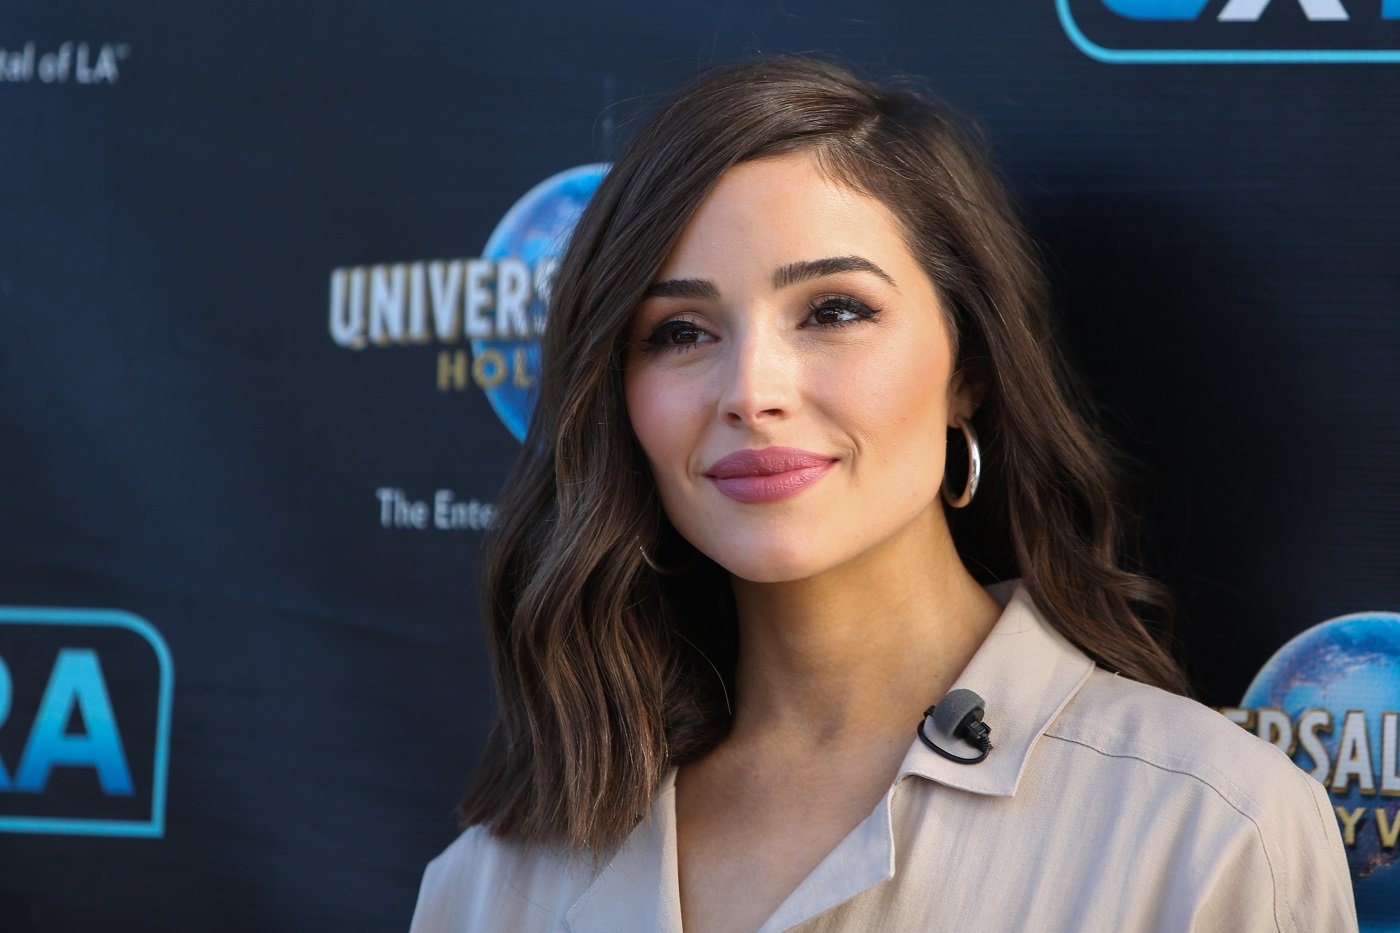 Olivia Culpo visits the set of "Extra" at Universal Studios Hollywood on January 24, 2019. Olivia Culpo opened up about past relationships on 'The Culpo Sisters'